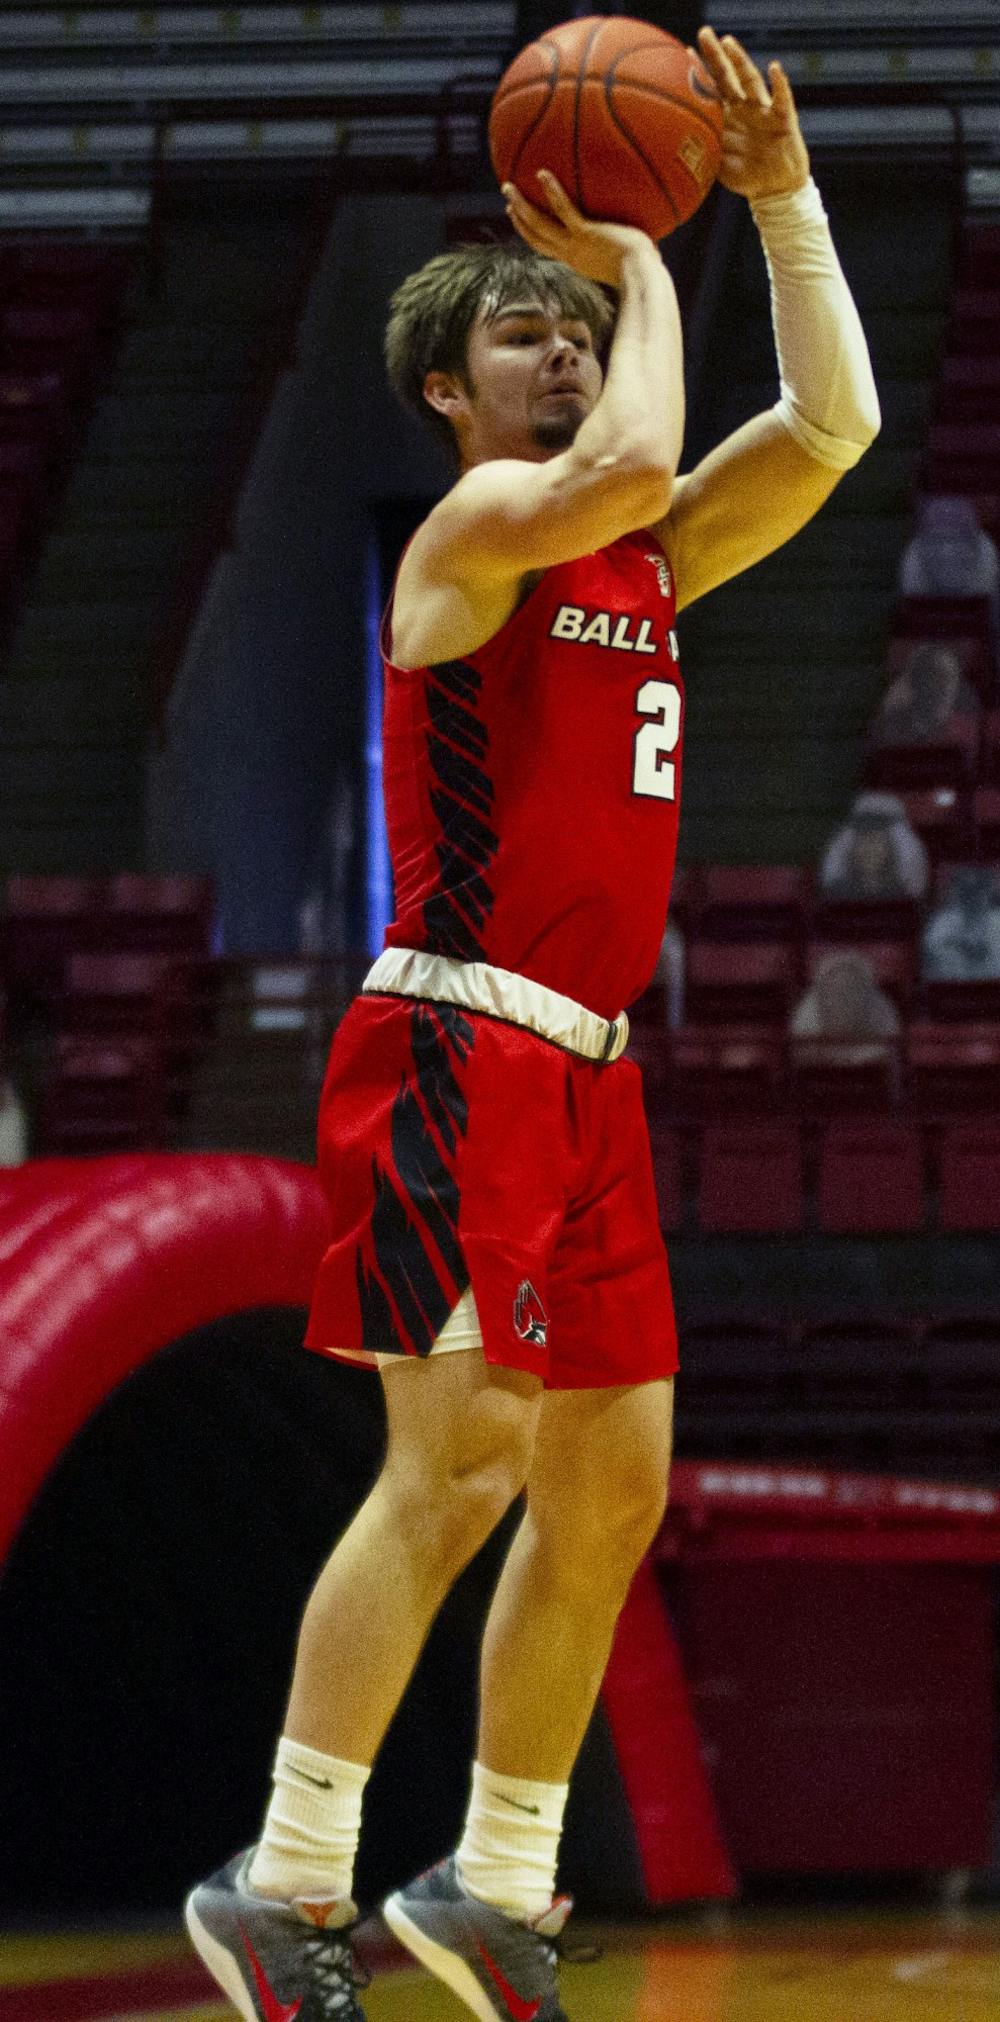 <p>Sophomore guard Luke Bumbalough shoots a three point shot Feb. 27, 2021, in John E. Worthen Arena. The Cardinals won 97-91 against the Chippewas.<strong> Grace Walton, DN</strong></p>